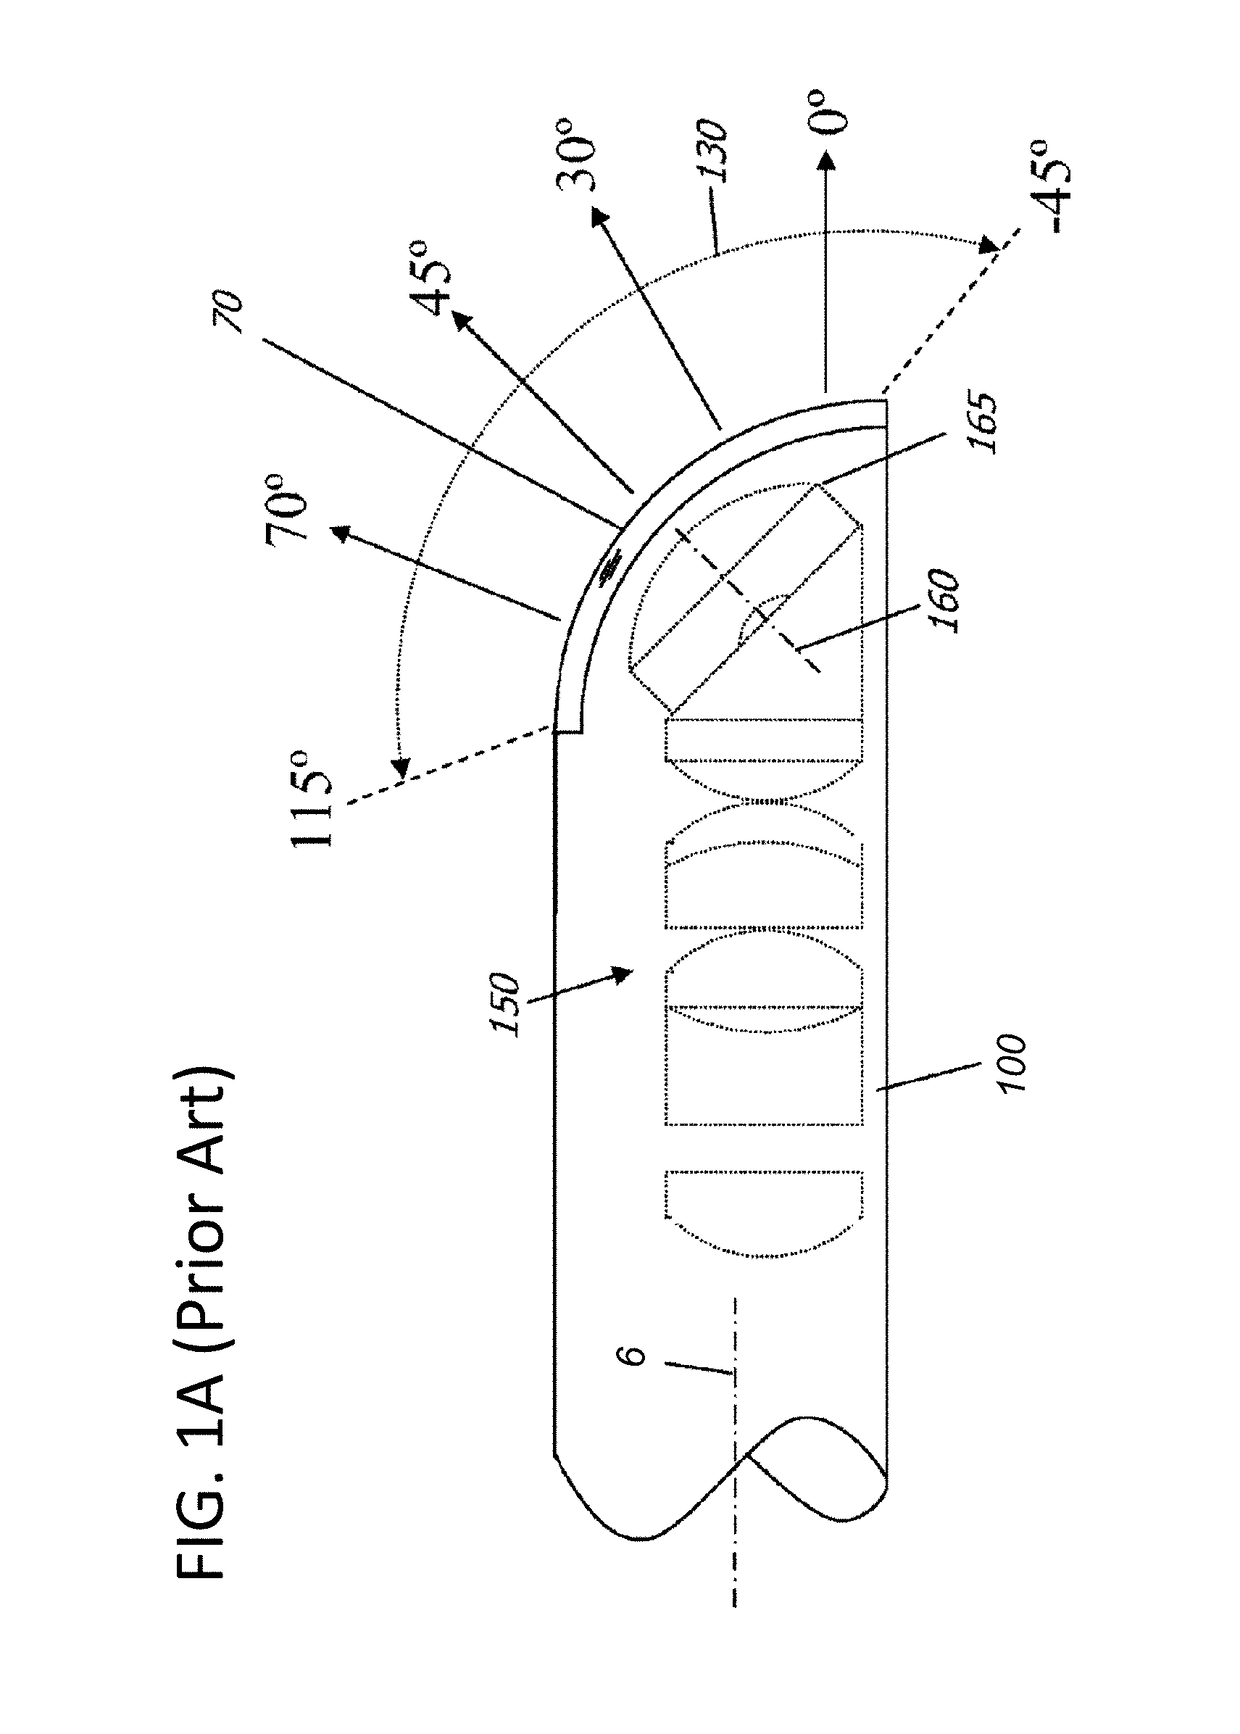 Exposure control method and system for an image capture device